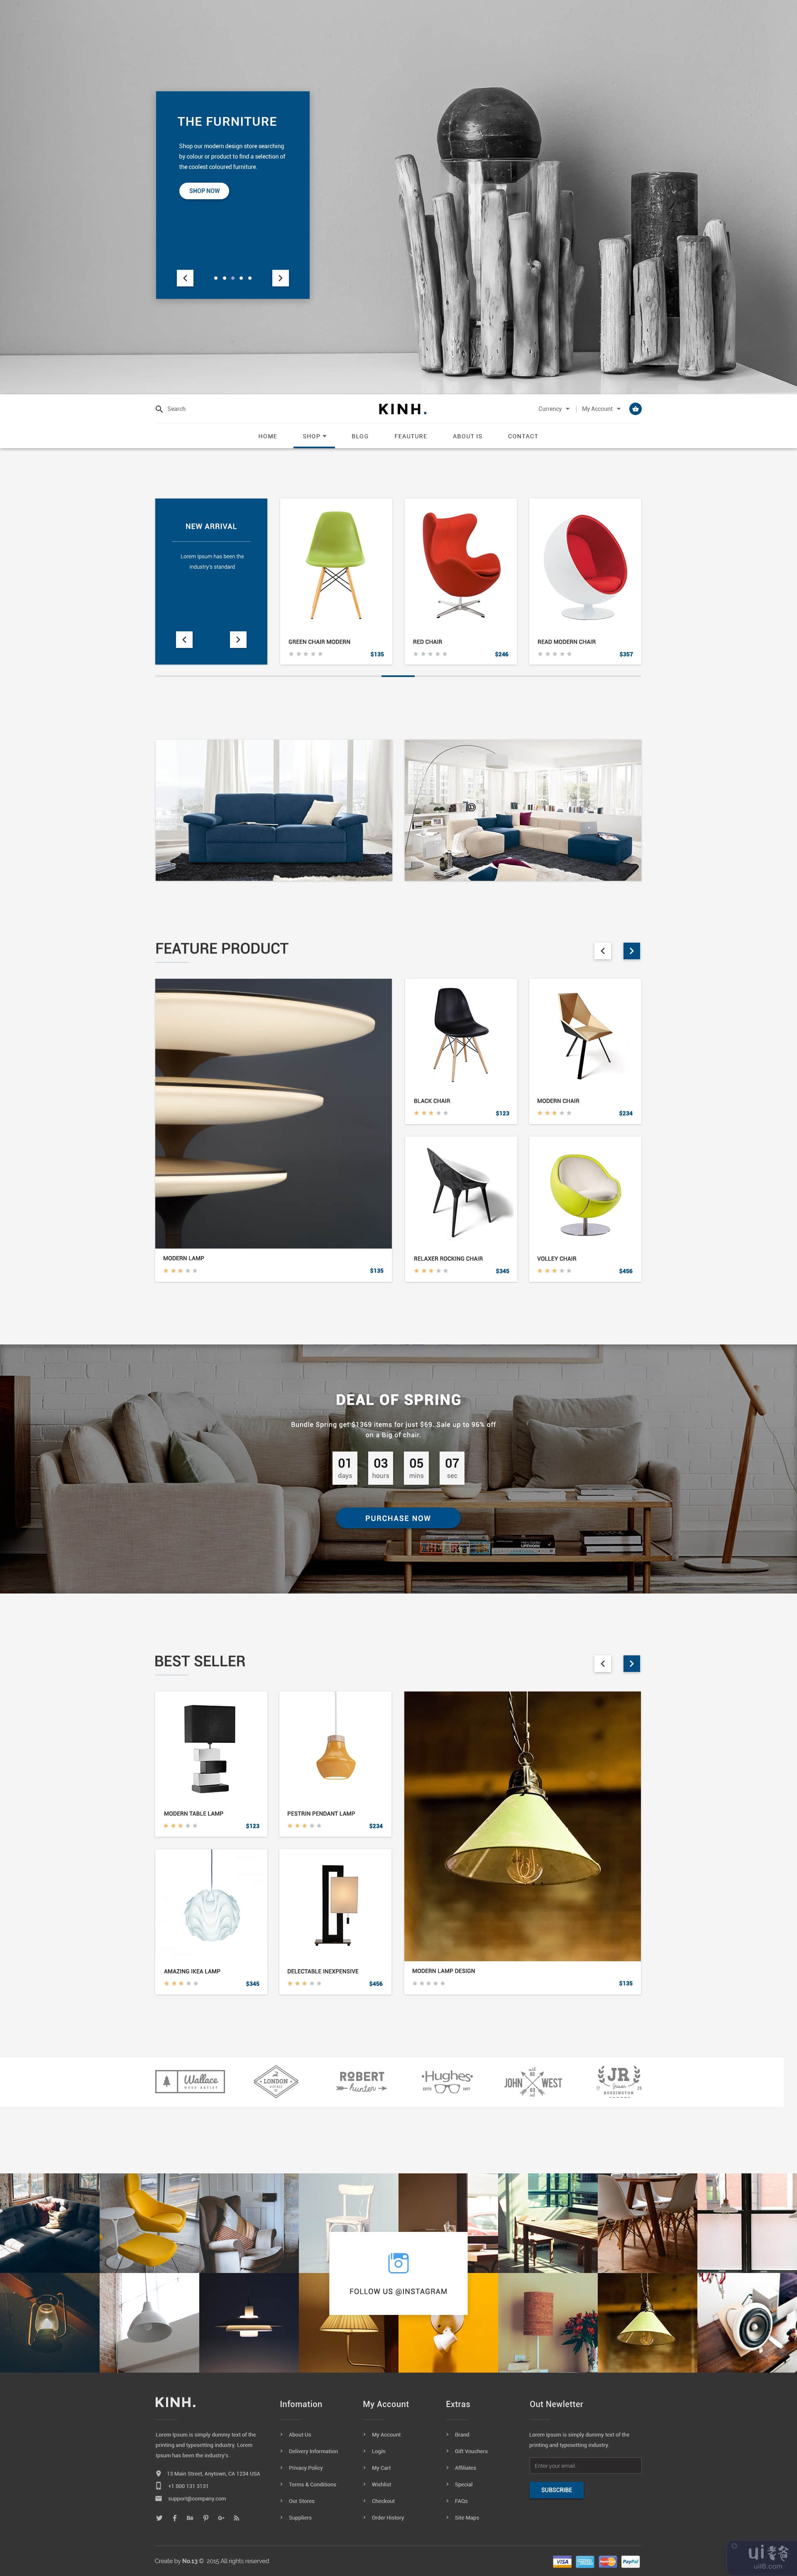 Kinh - 材料电子商务 PSD 模板(Kinh - Material E-Commerce PSD Template)插图14